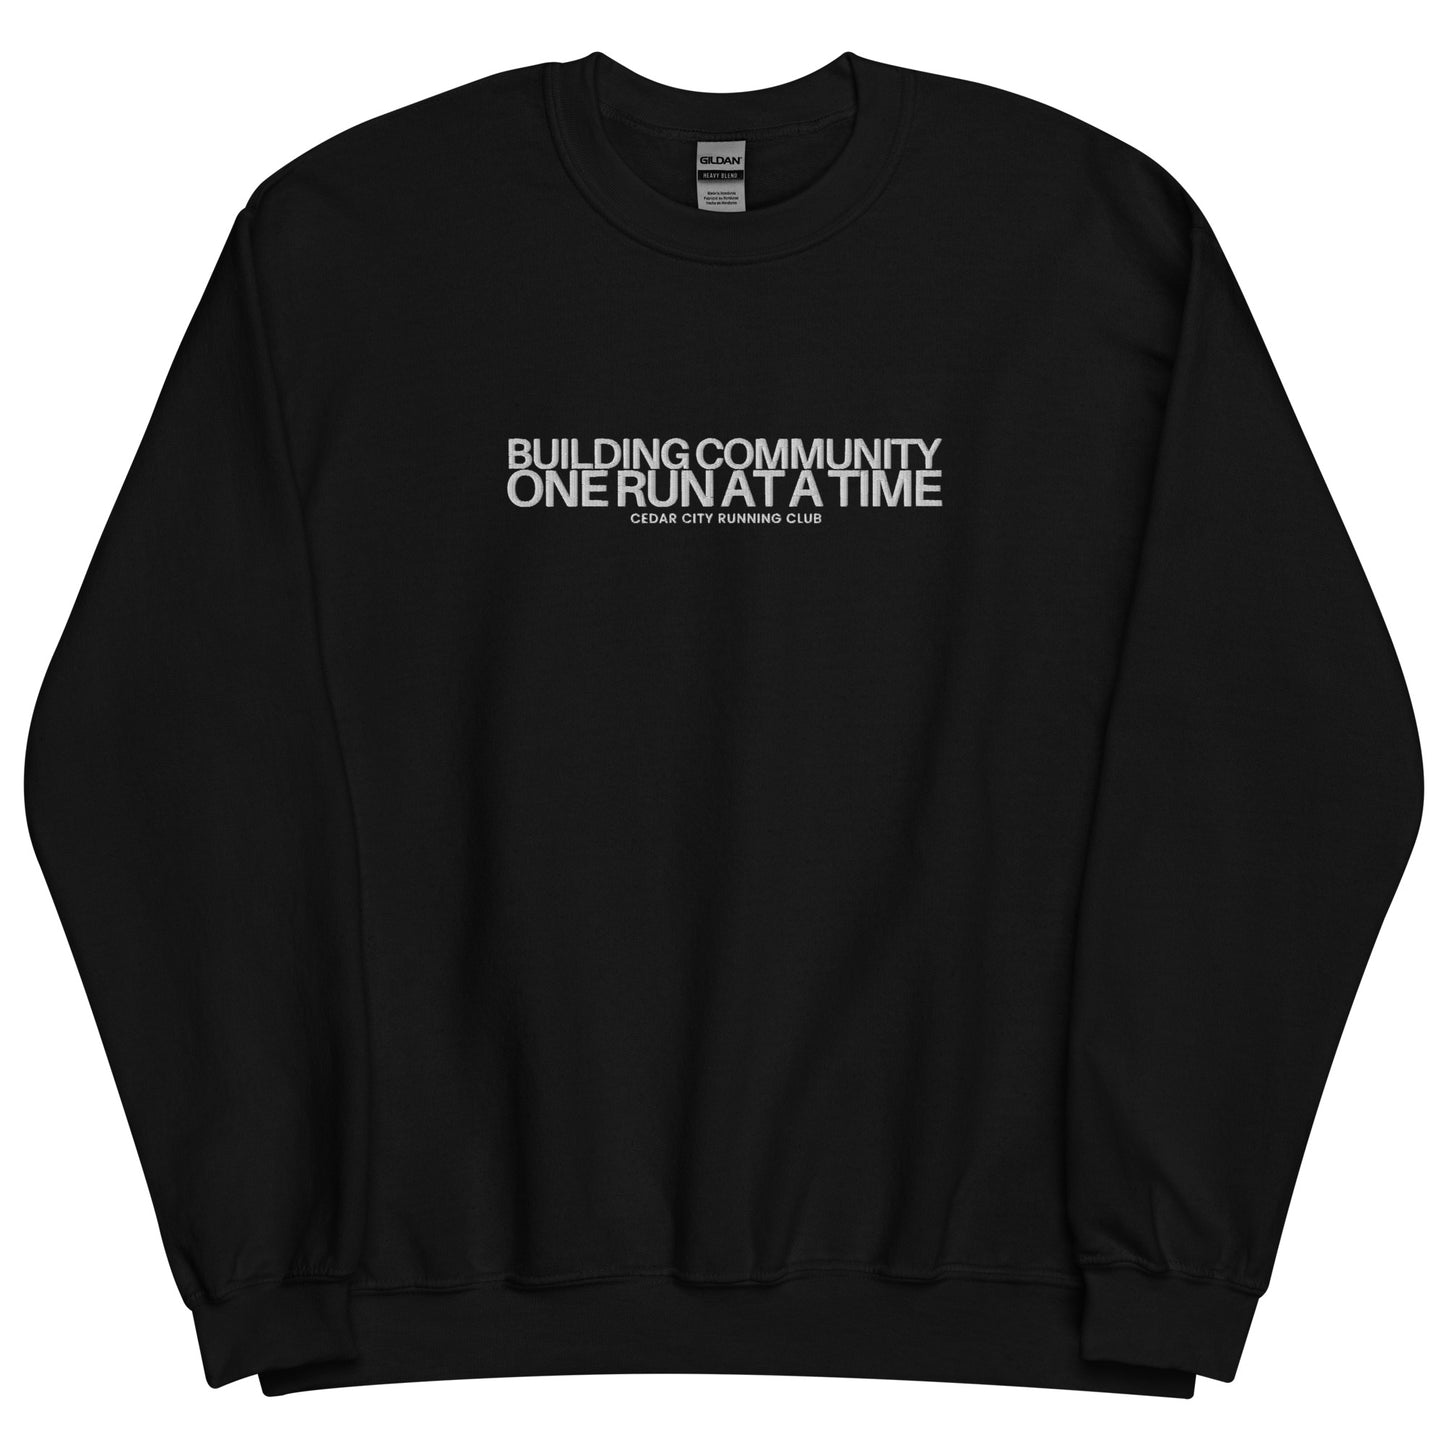 Building Community Embroidered Crewneck